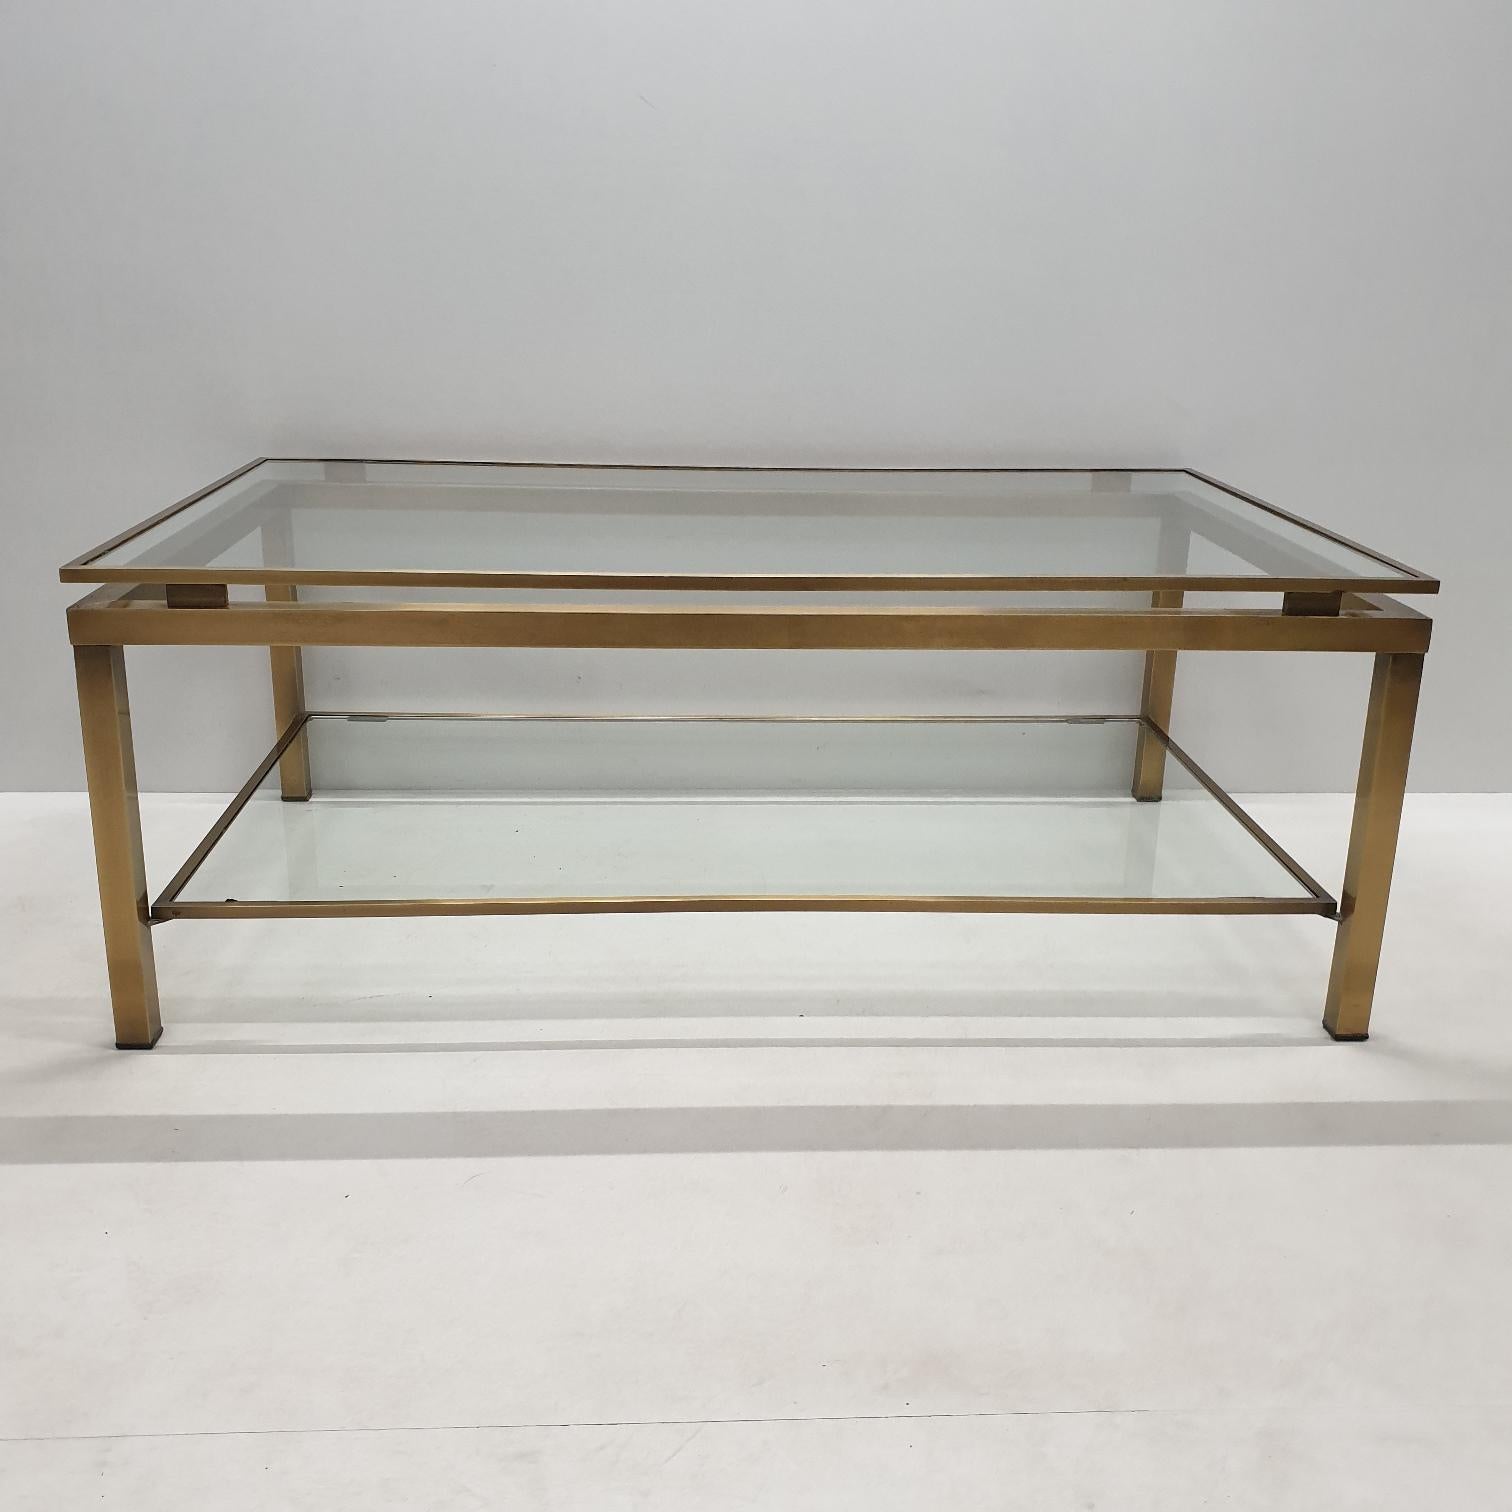 Vintage brass rectangular 2-tiers coffee table by Ben Demmers for BD Design, 1980s
handmade coffee table with 2 cut glass plates which are enclosed in the brass frames.
The table has a brushed brass frame.

In the style of Maison Jansen.